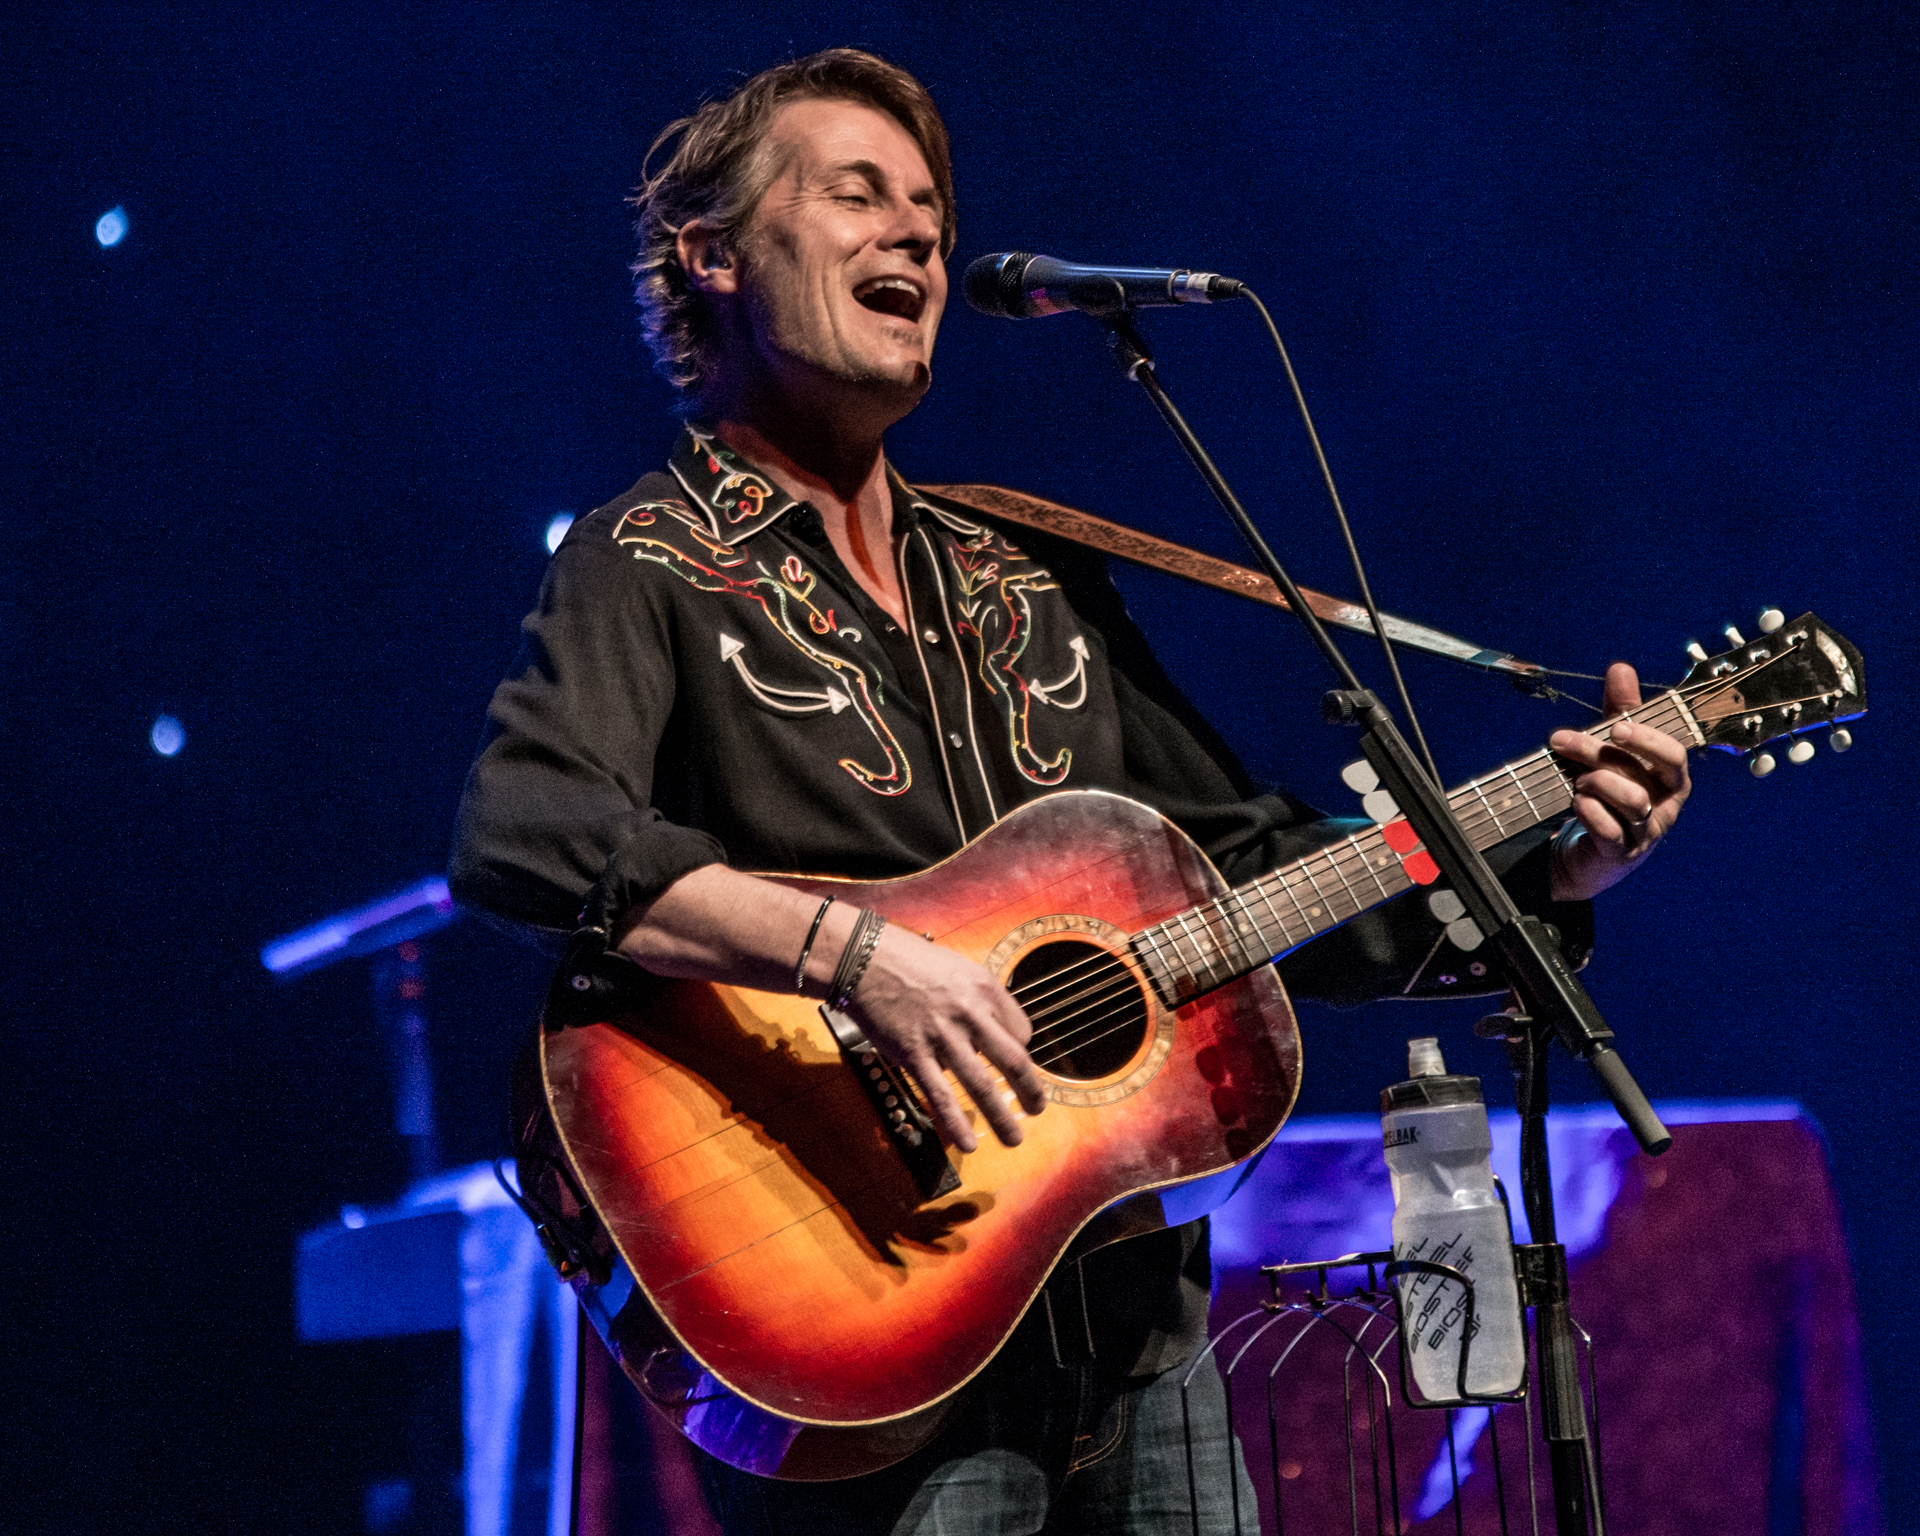 Jim Cuddy commands the stage in a black collared shirt with unique stitching, singing into the microphone and skillfully playing an acoustic guitar. Notably, his signature water bottle is attached to the microphone stand, a distinctive touch adding a personal flair to the performance. 